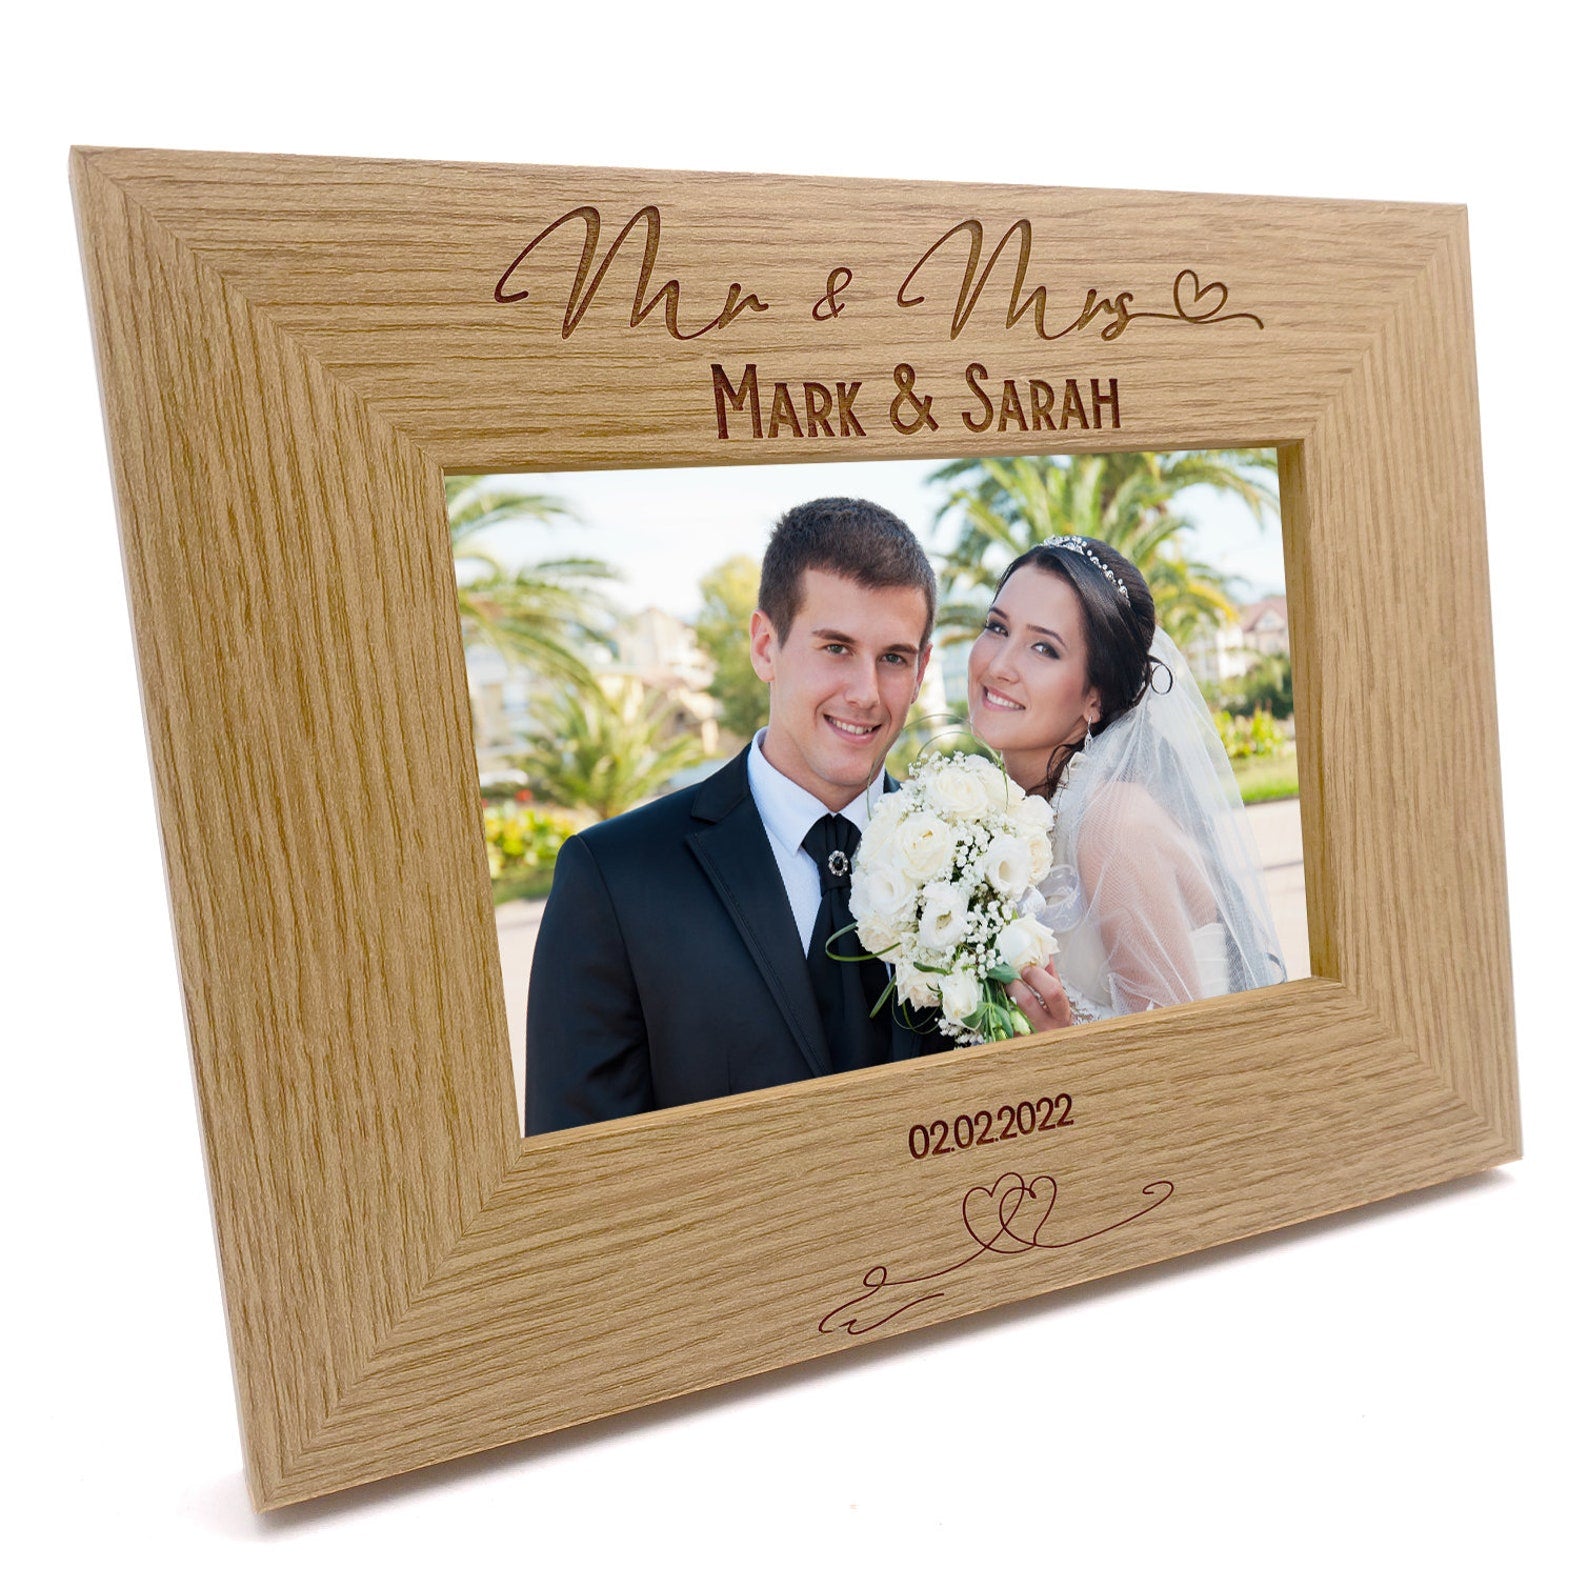 Mr and Mrs Love Heart Wedding Photo Frame Gift Landscape Engraved Wooden FW622